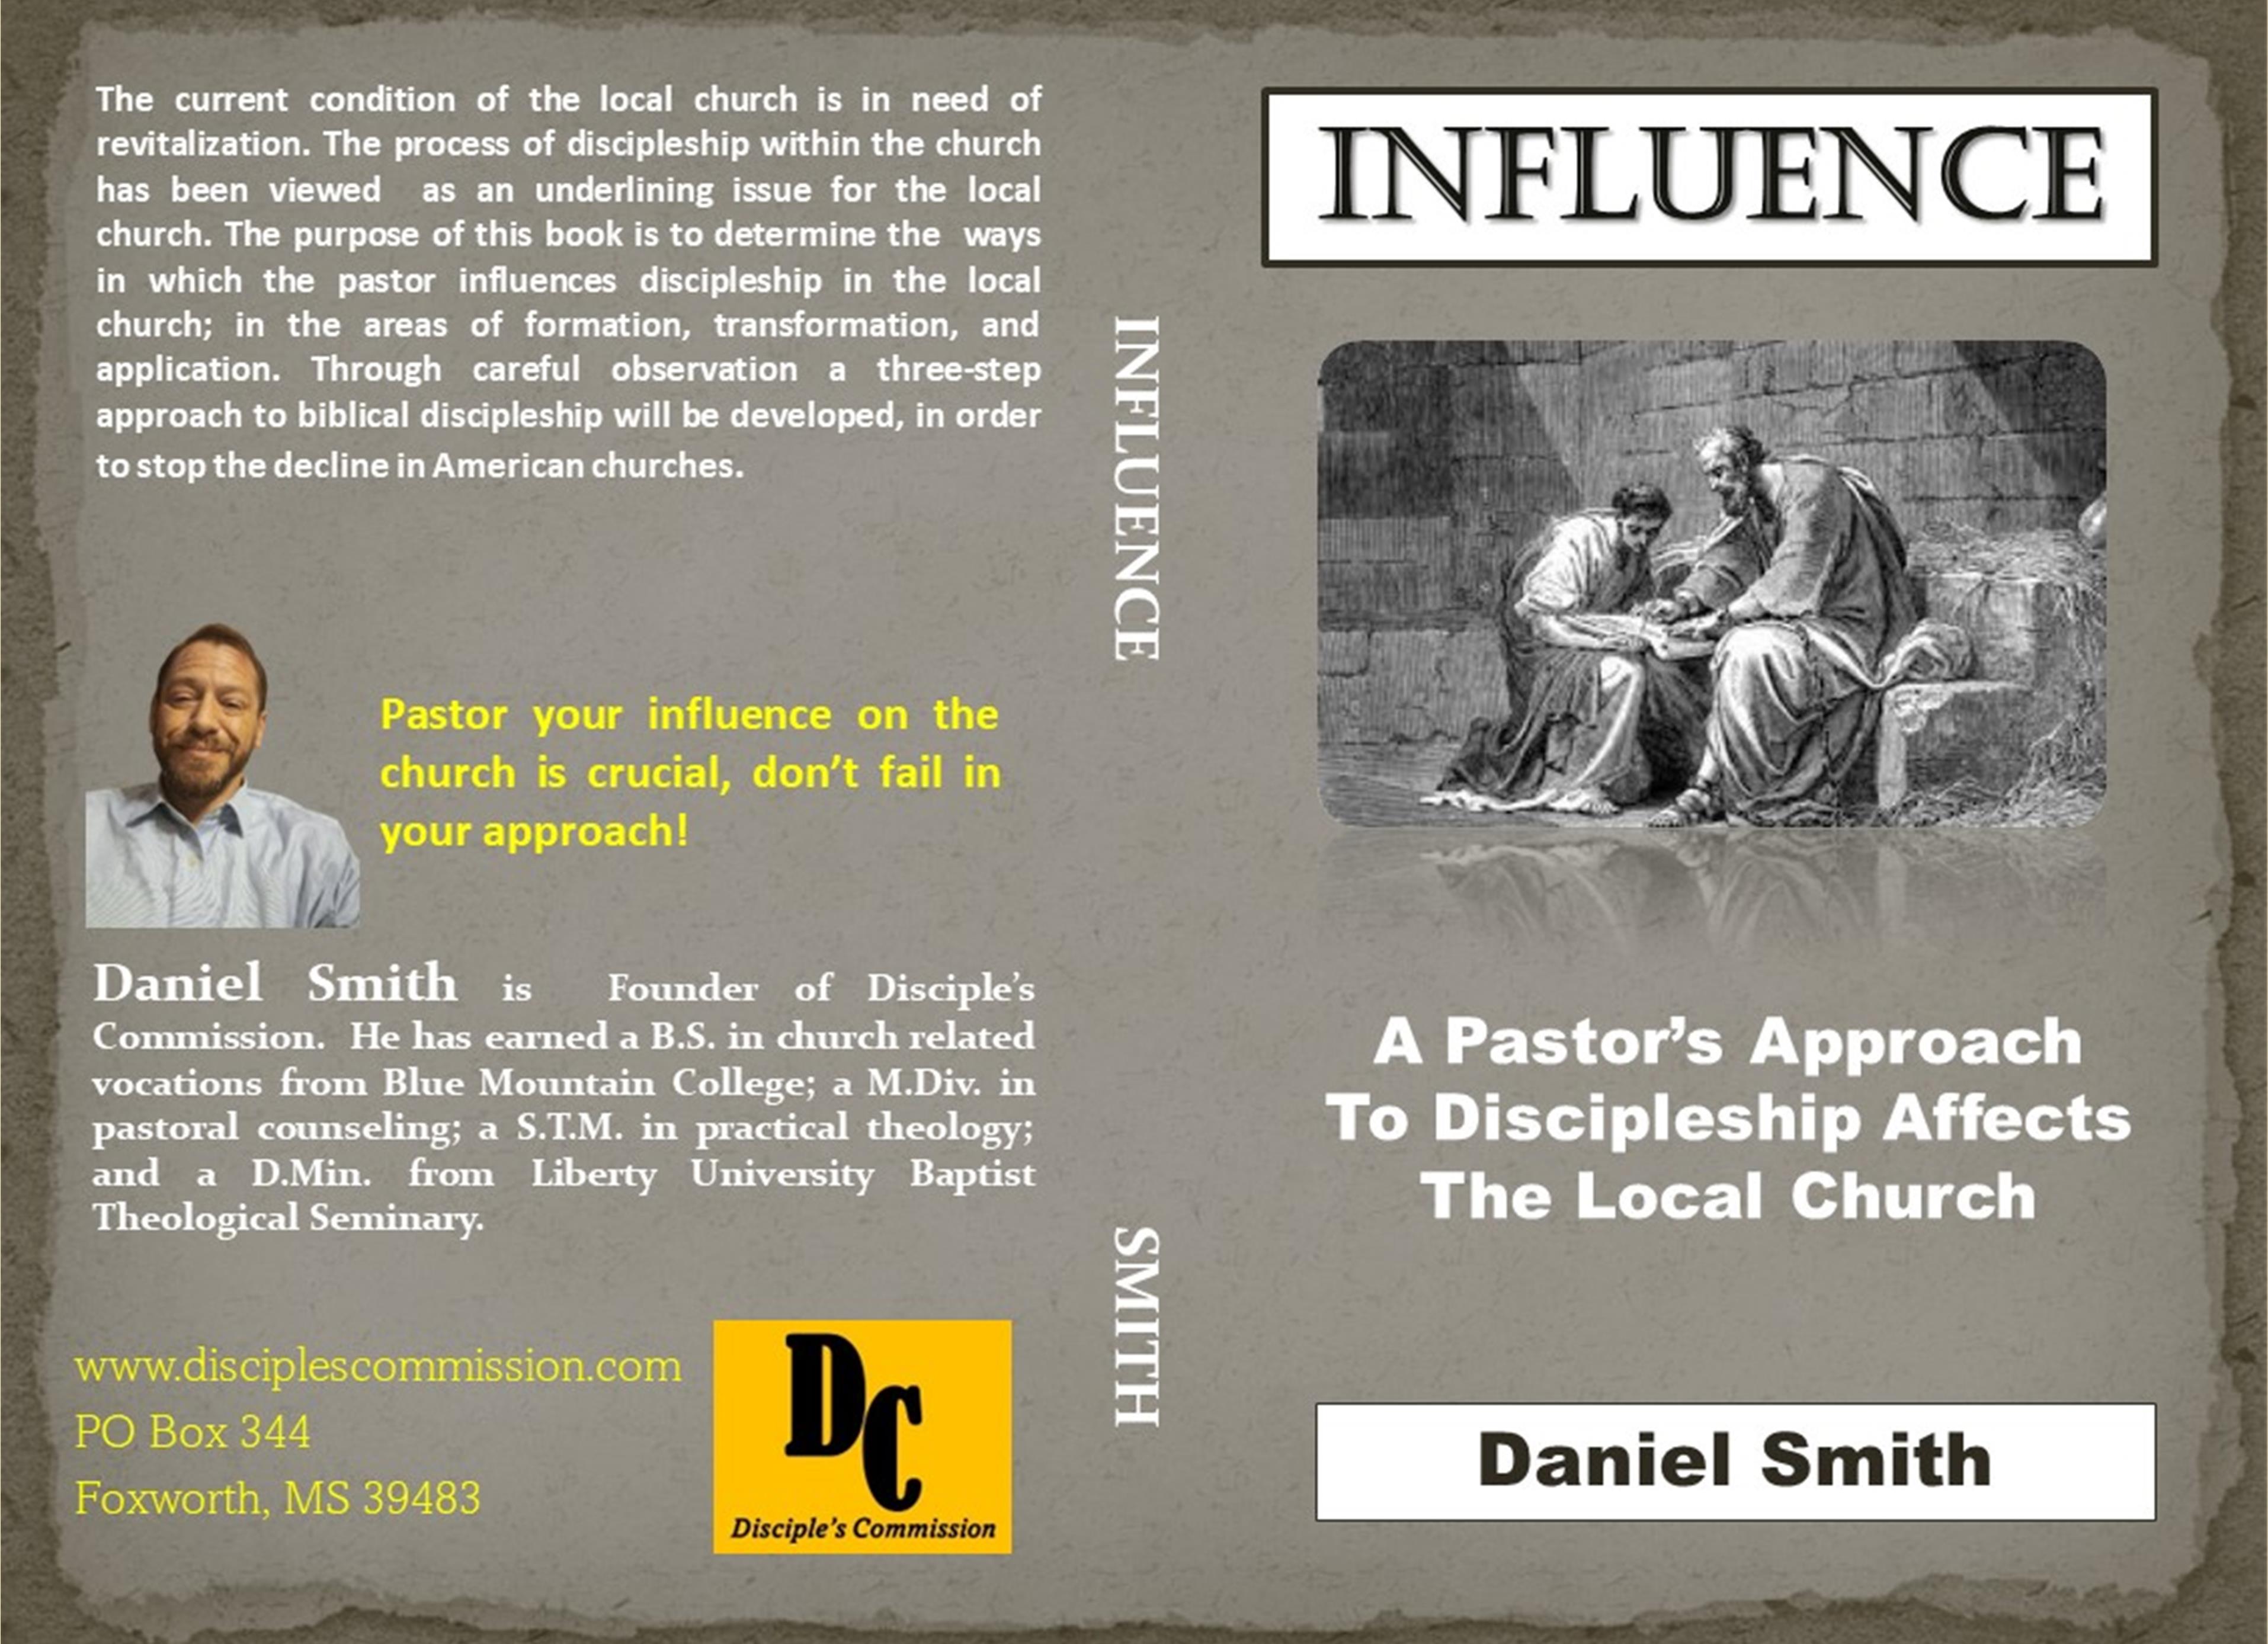 Influence: A Pastor